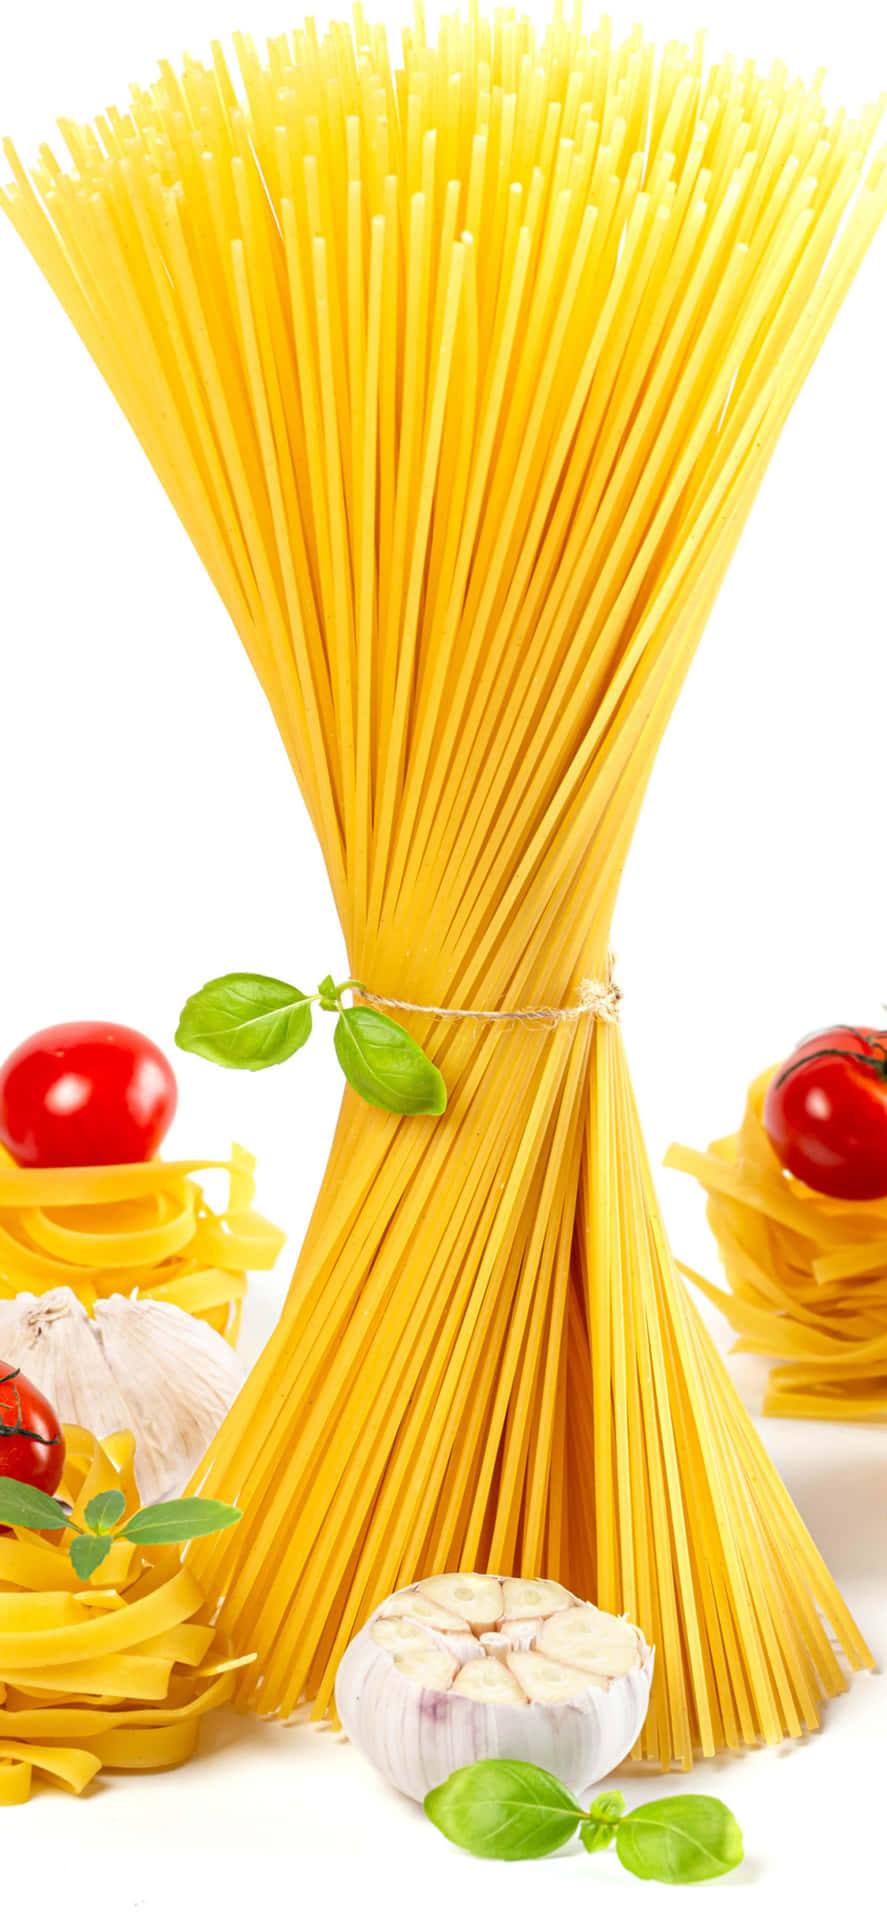 "Cooking Inspiration on iPhone X: Tempting Pasta Display"